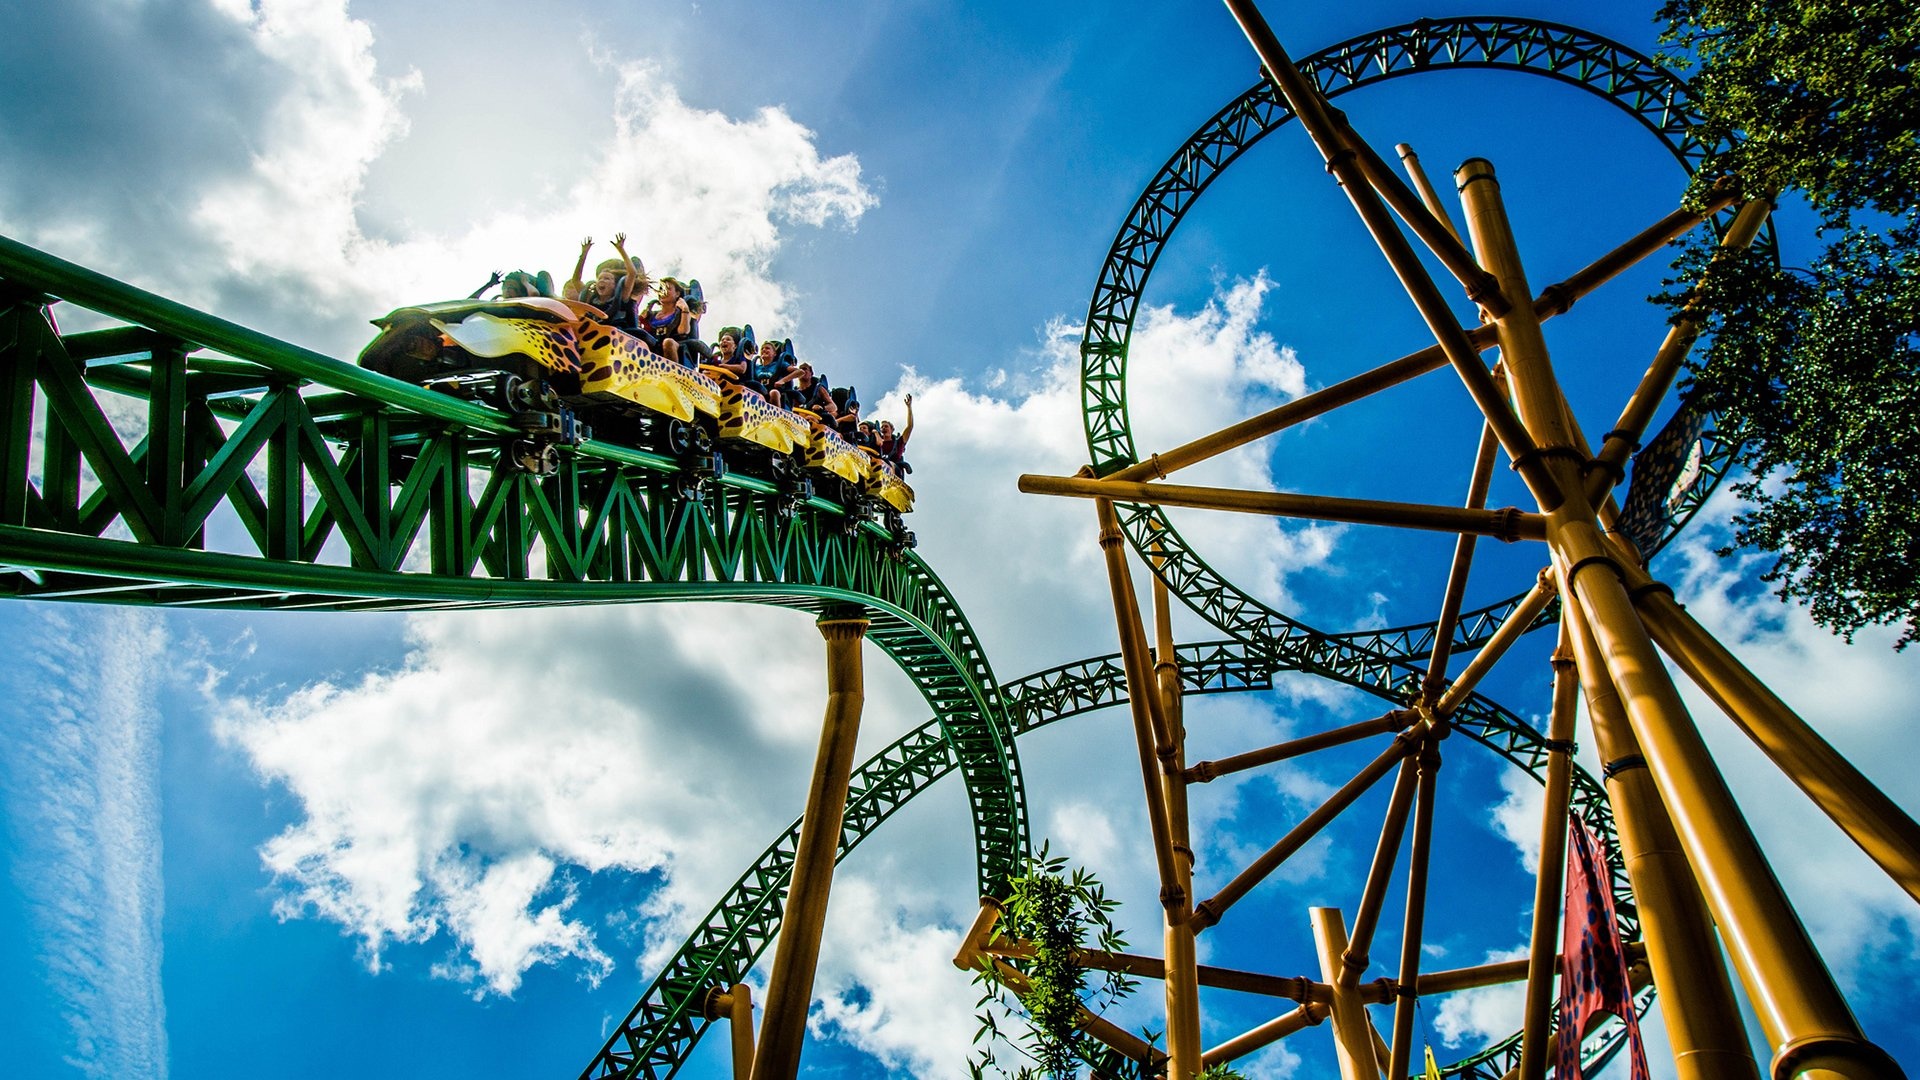 Amusement Park: Roller coaster, Fun rides, Roll adventure, A place that has many rides. 1920x1080 Full HD Background.